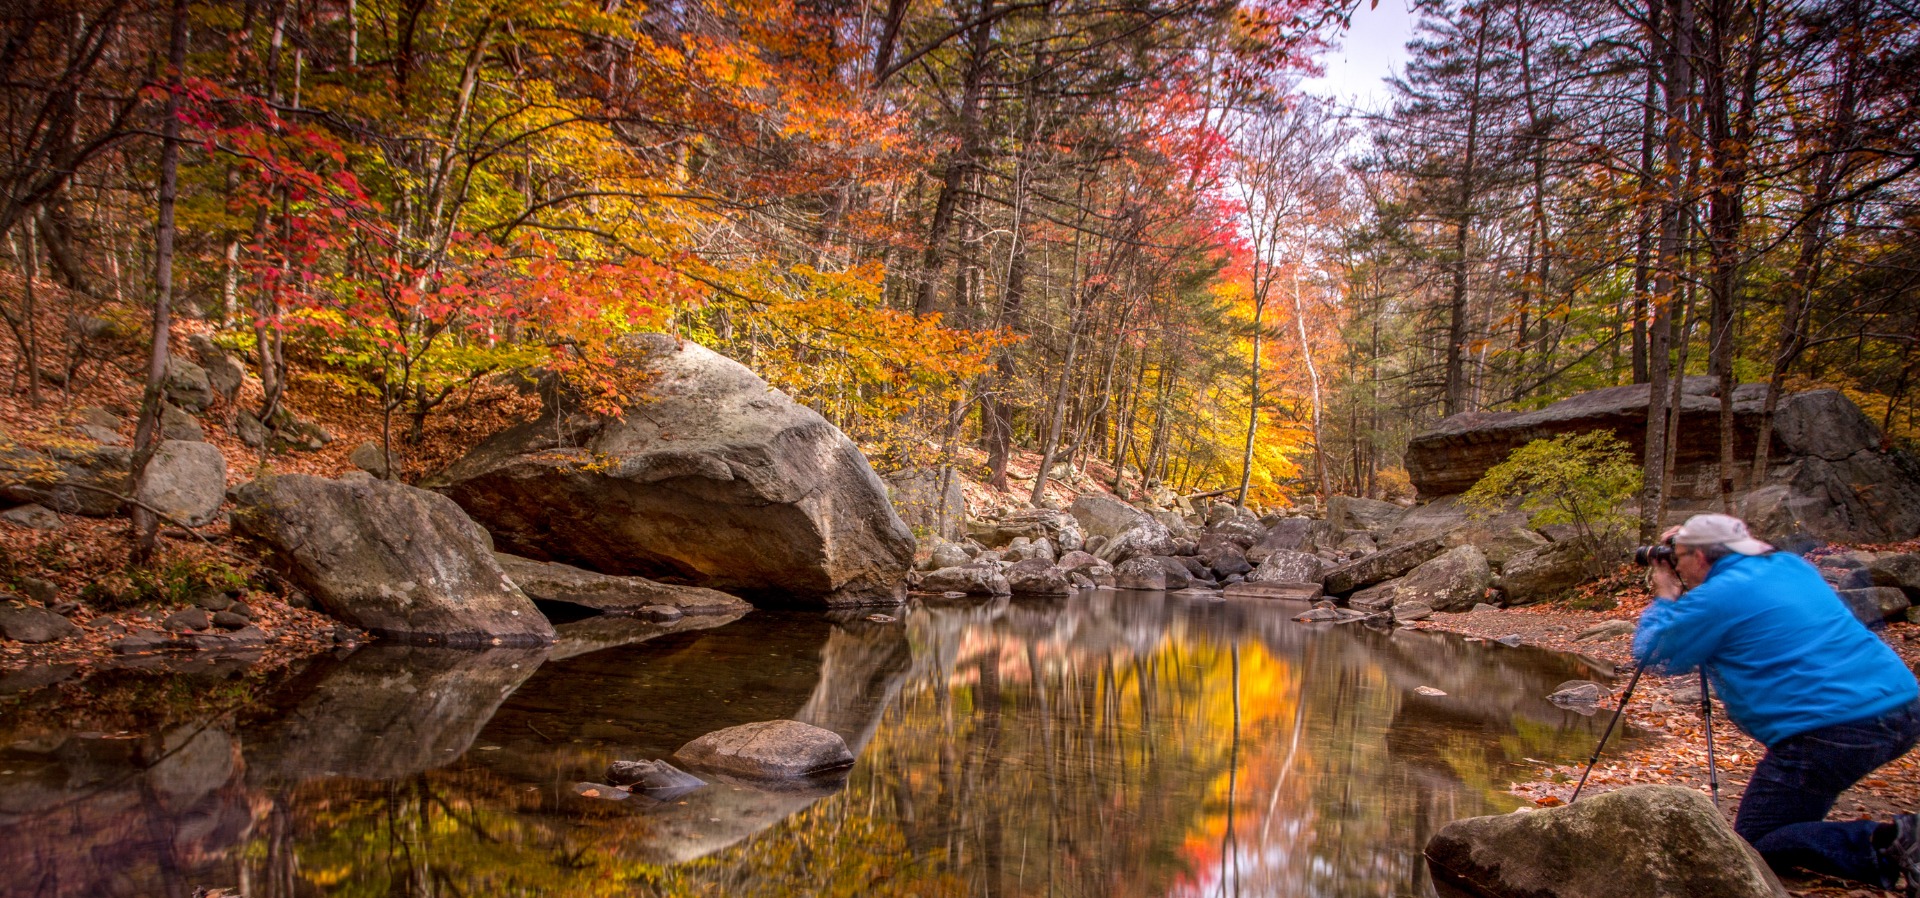 Fall Photography Hike with PhoTour Adventures. Photo by Susan Magnano.